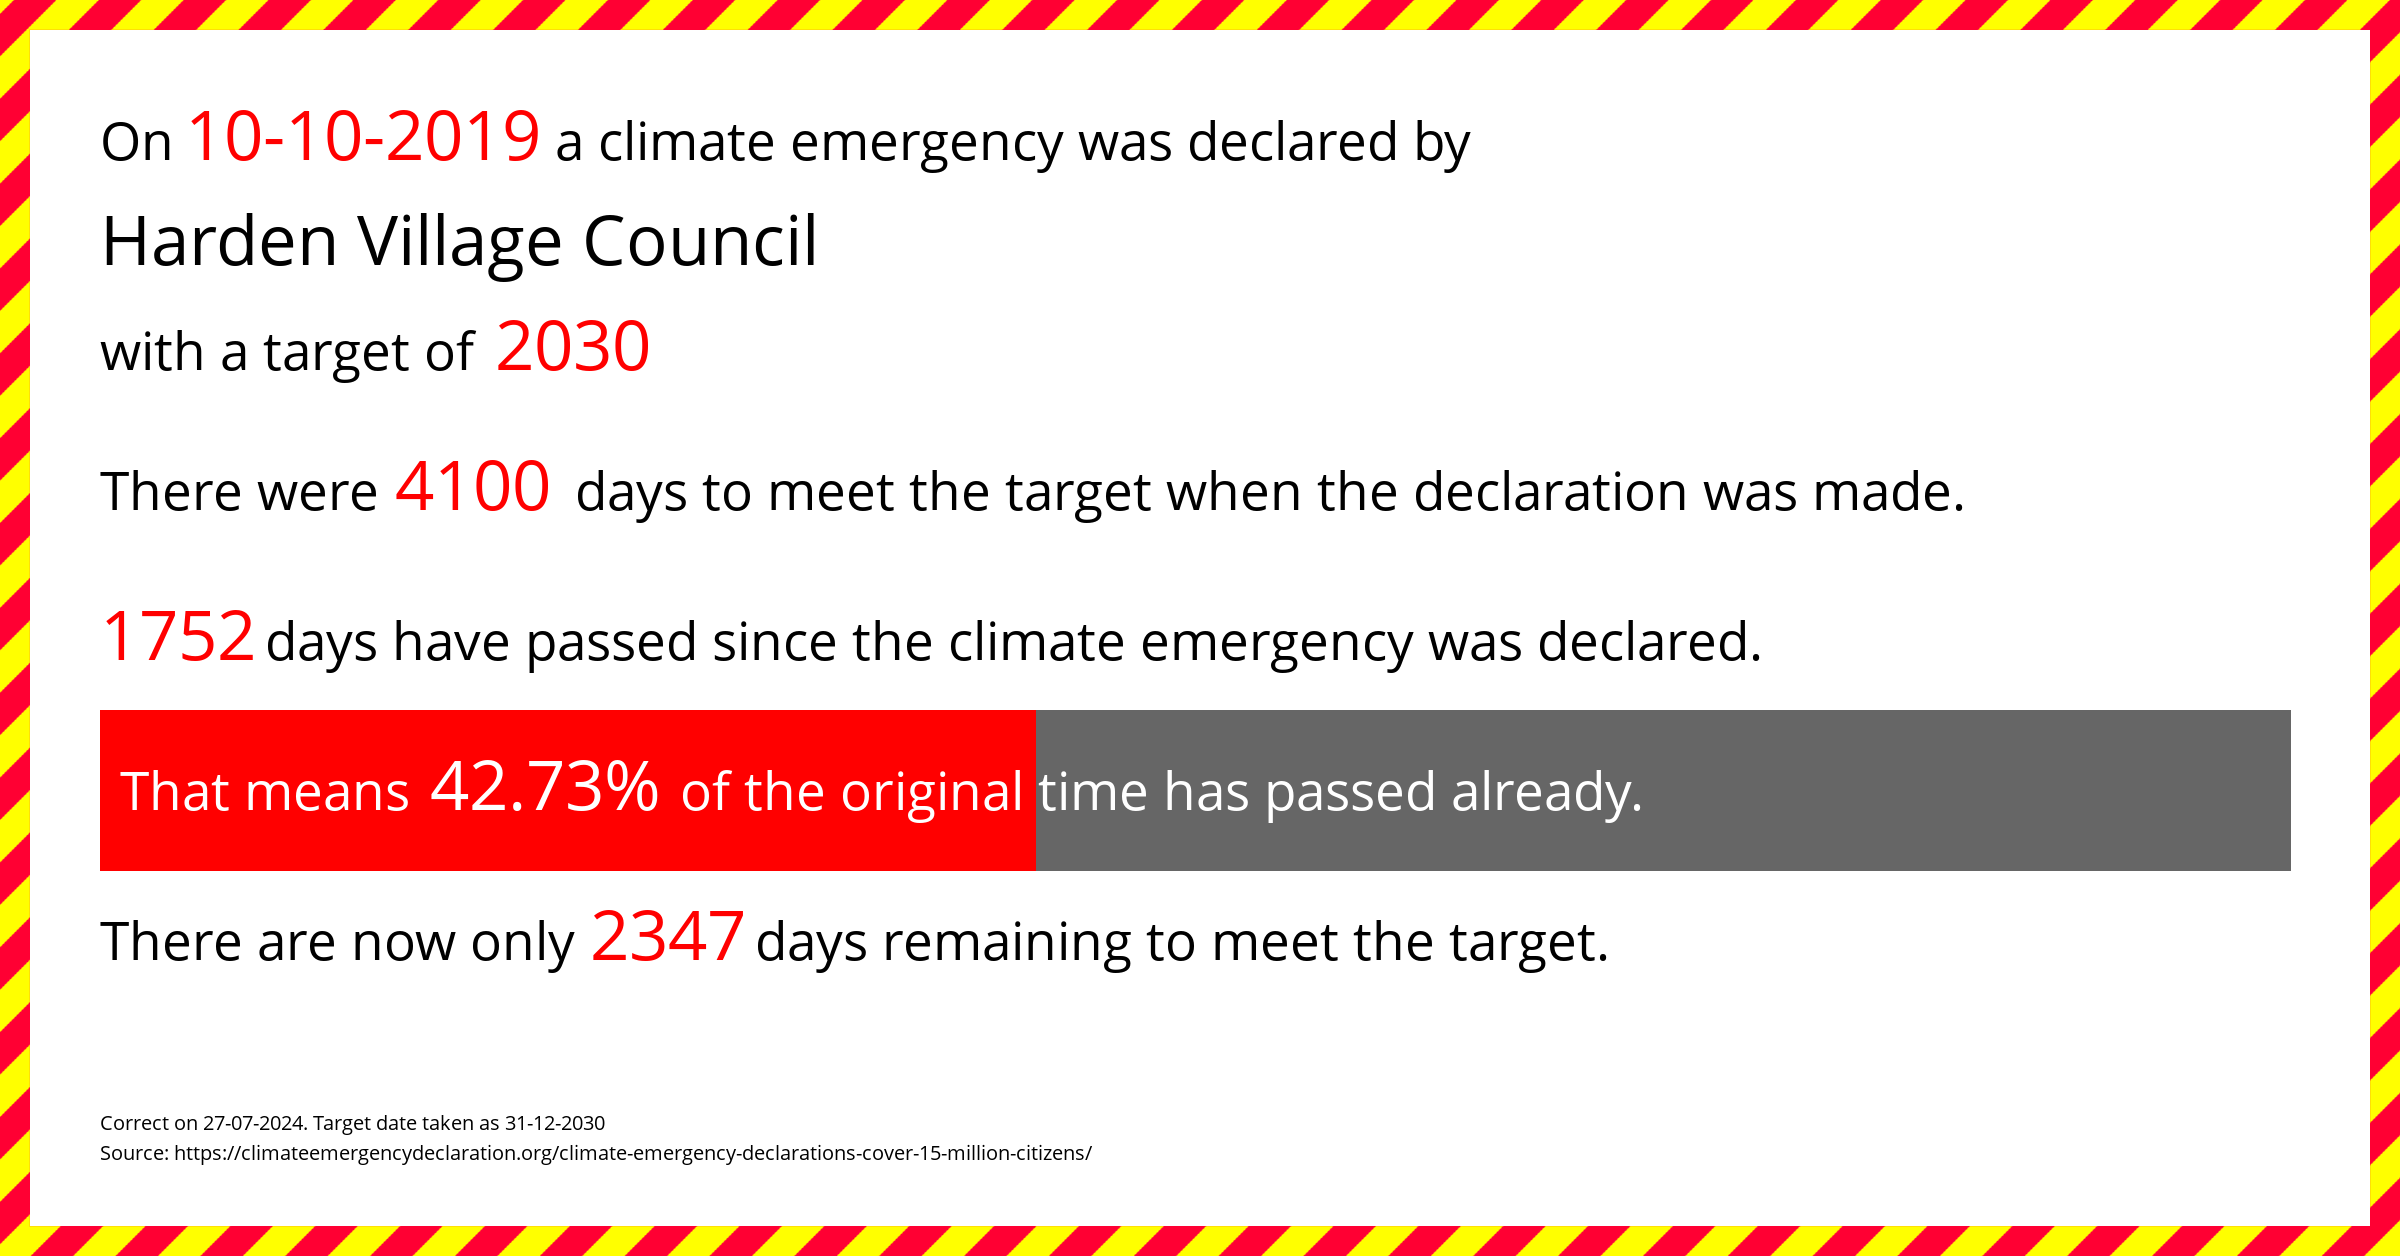 Harden Village Council declared a Climate emergency on Thursday 10th October 2019, with a target of 2030.